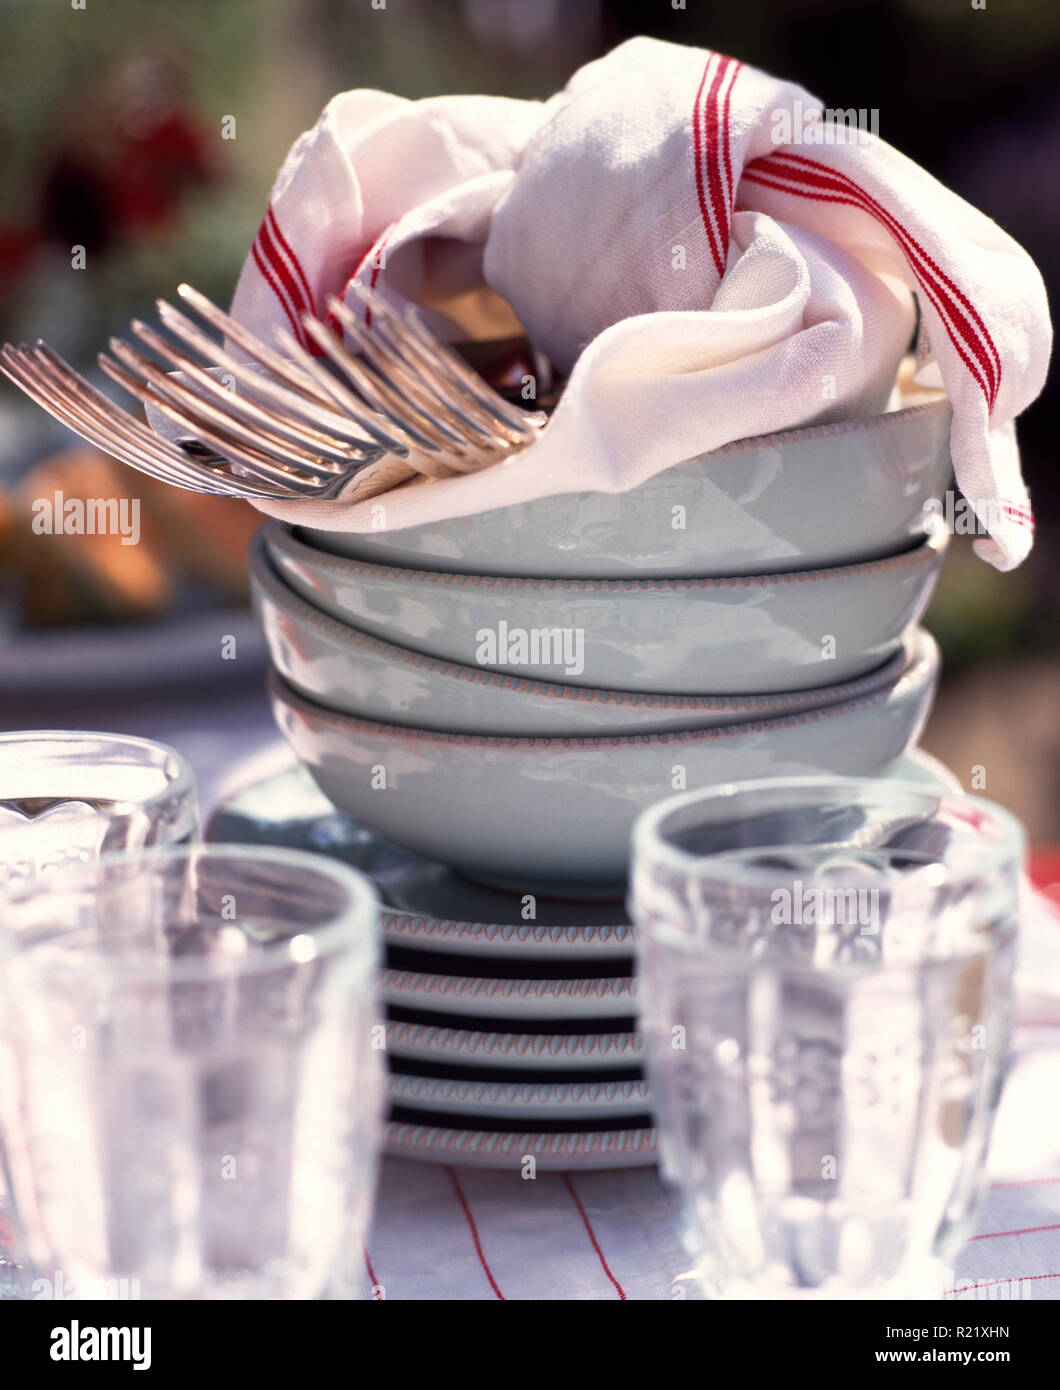 Close-up of forks on stack of white bowls Stock Photo